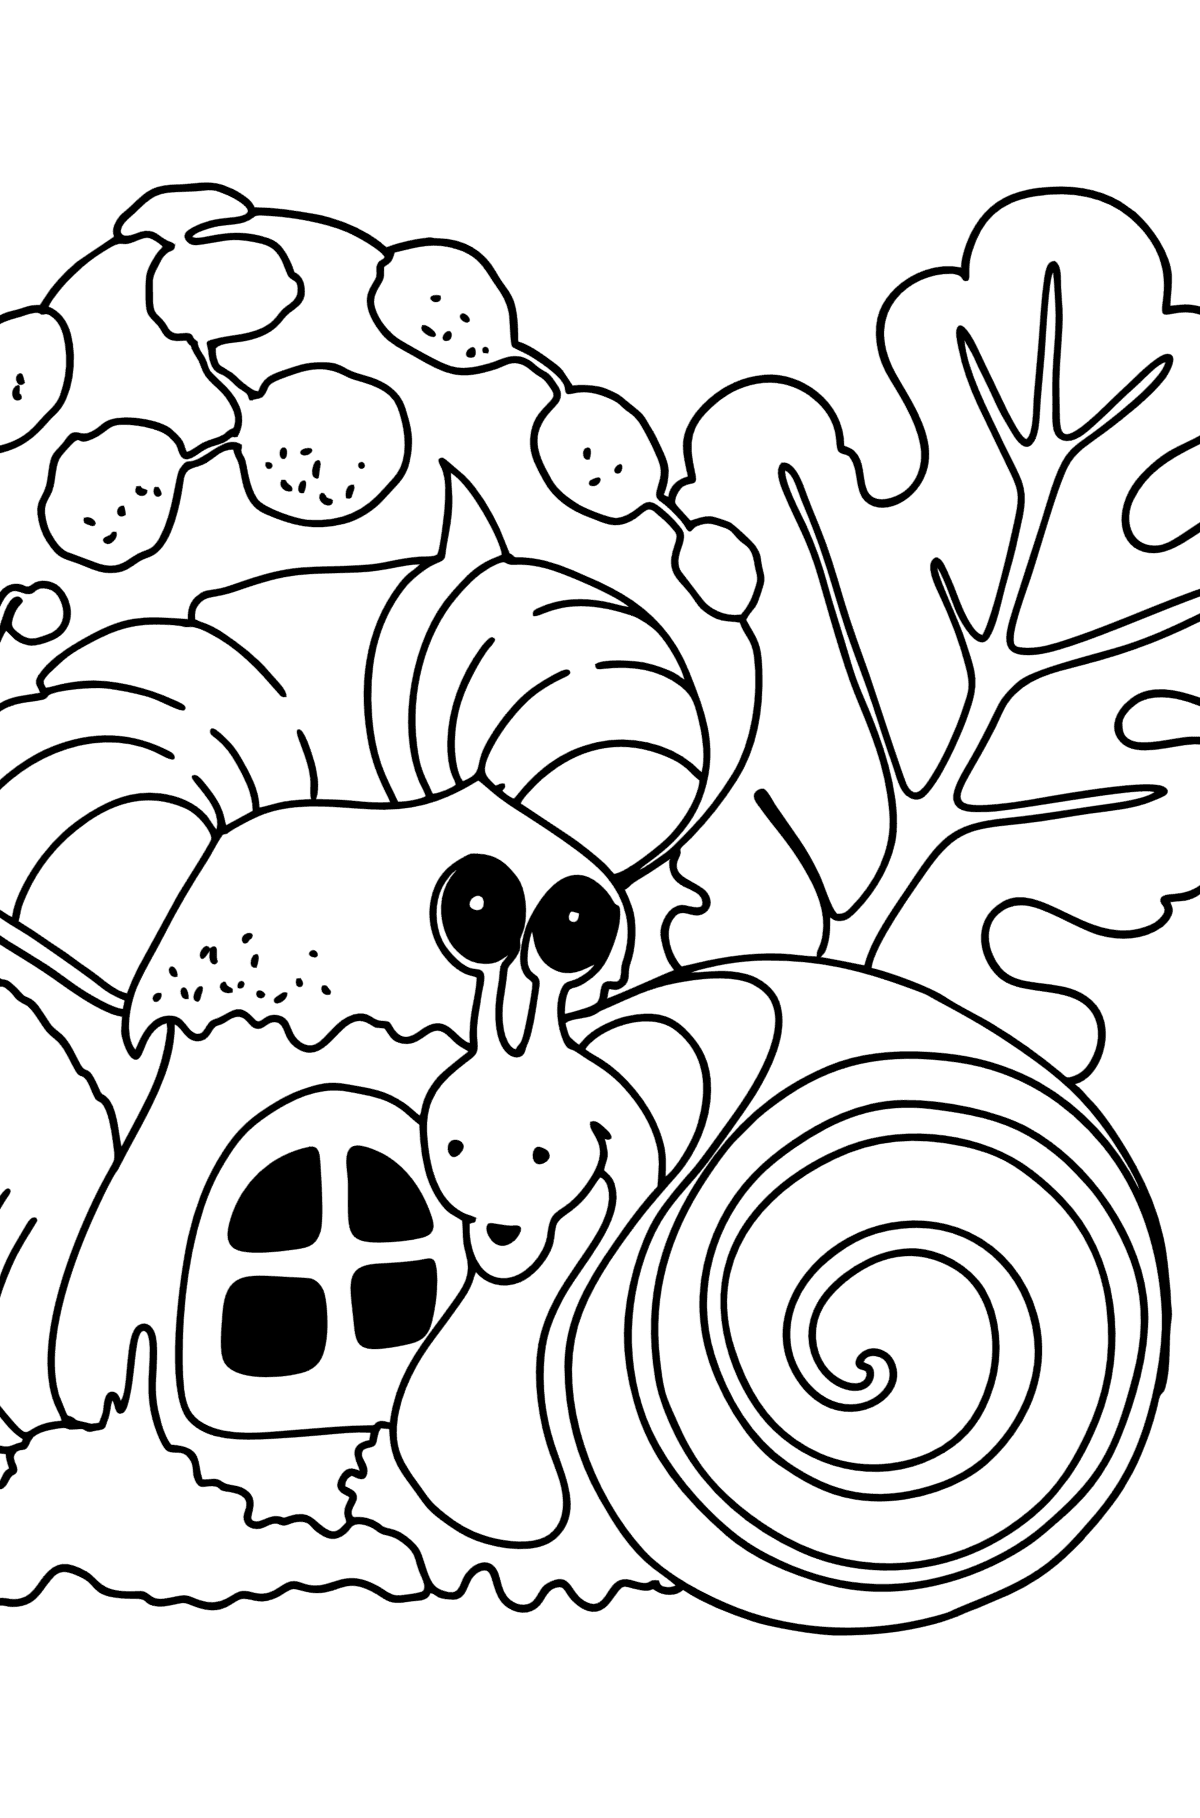 Snail and Amanita coloring page - Coloring Pages for Kids